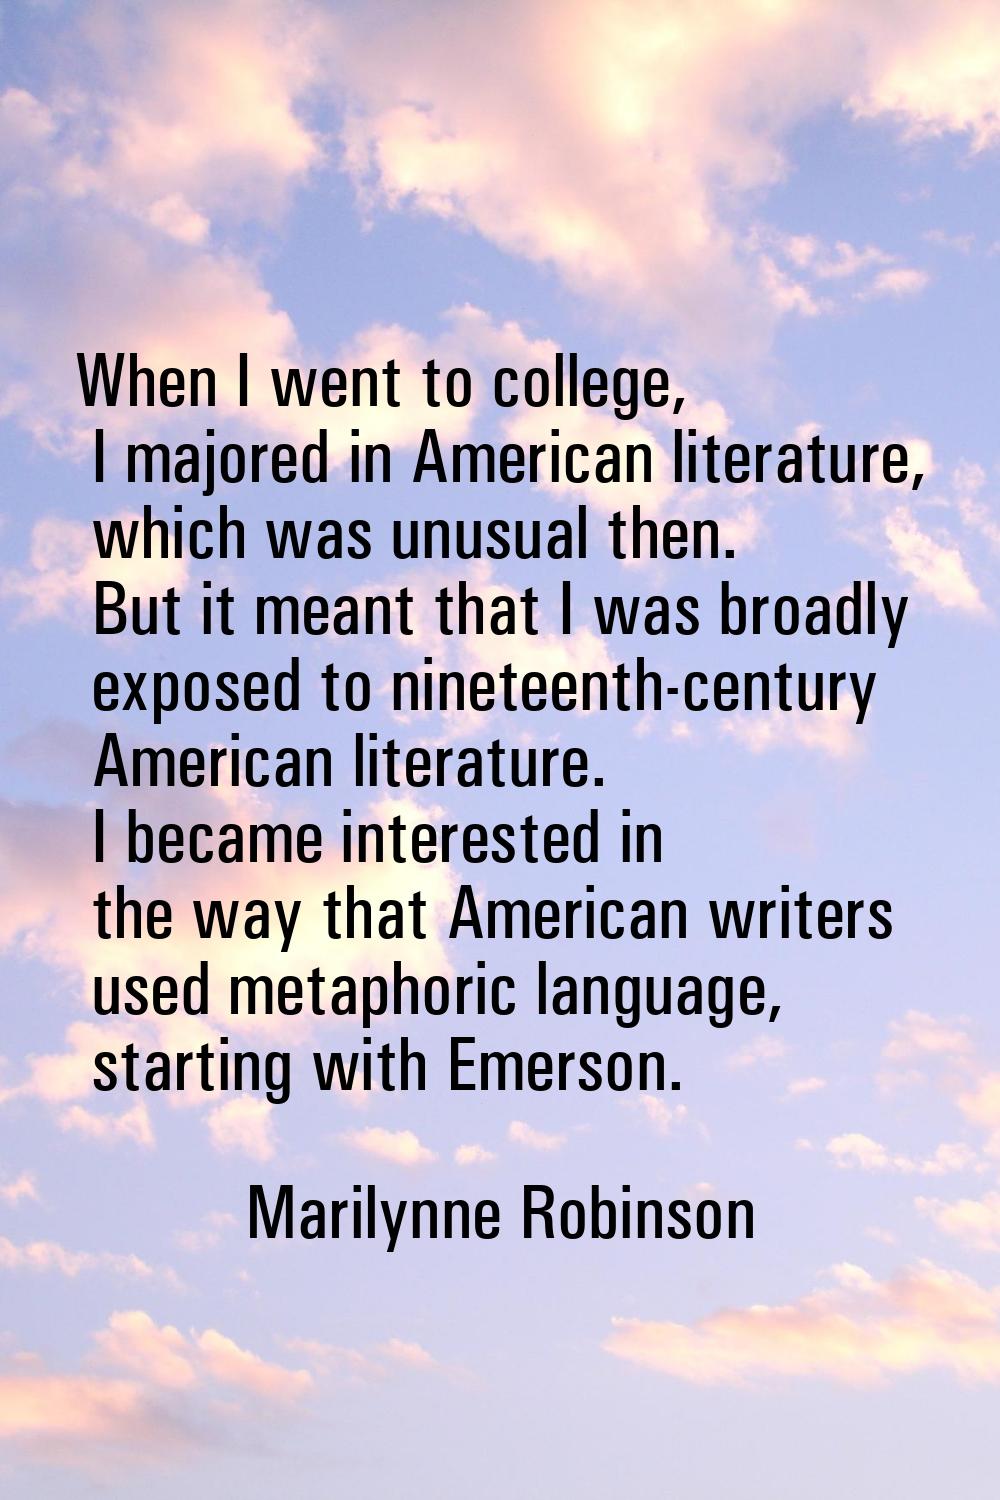 When I went to college, I majored in American literature, which was unusual then. But it meant that